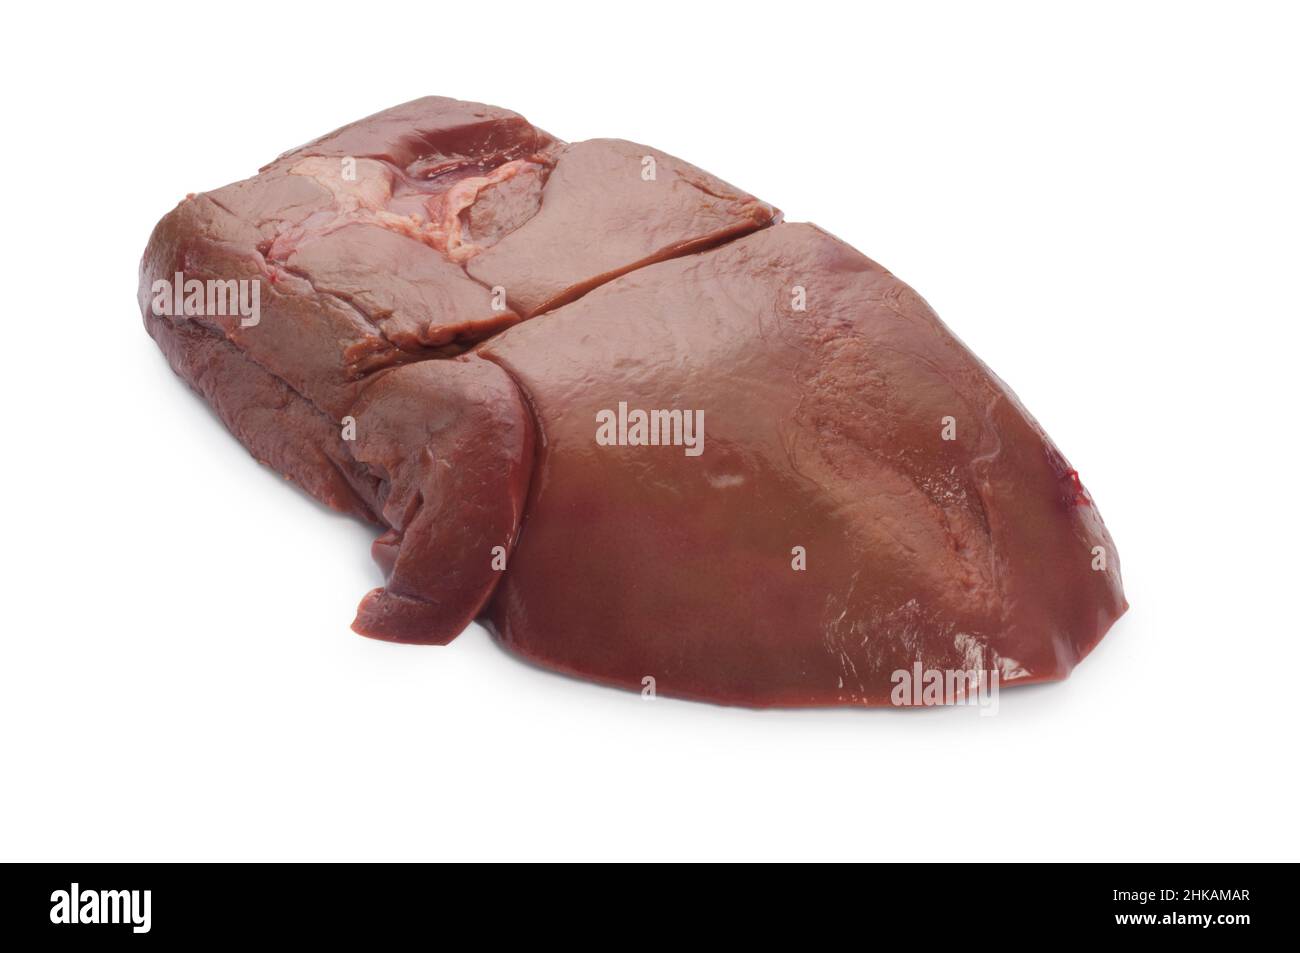 Studio shot of raw lambs liver cut out against a white background - John Gollop Stock Photo